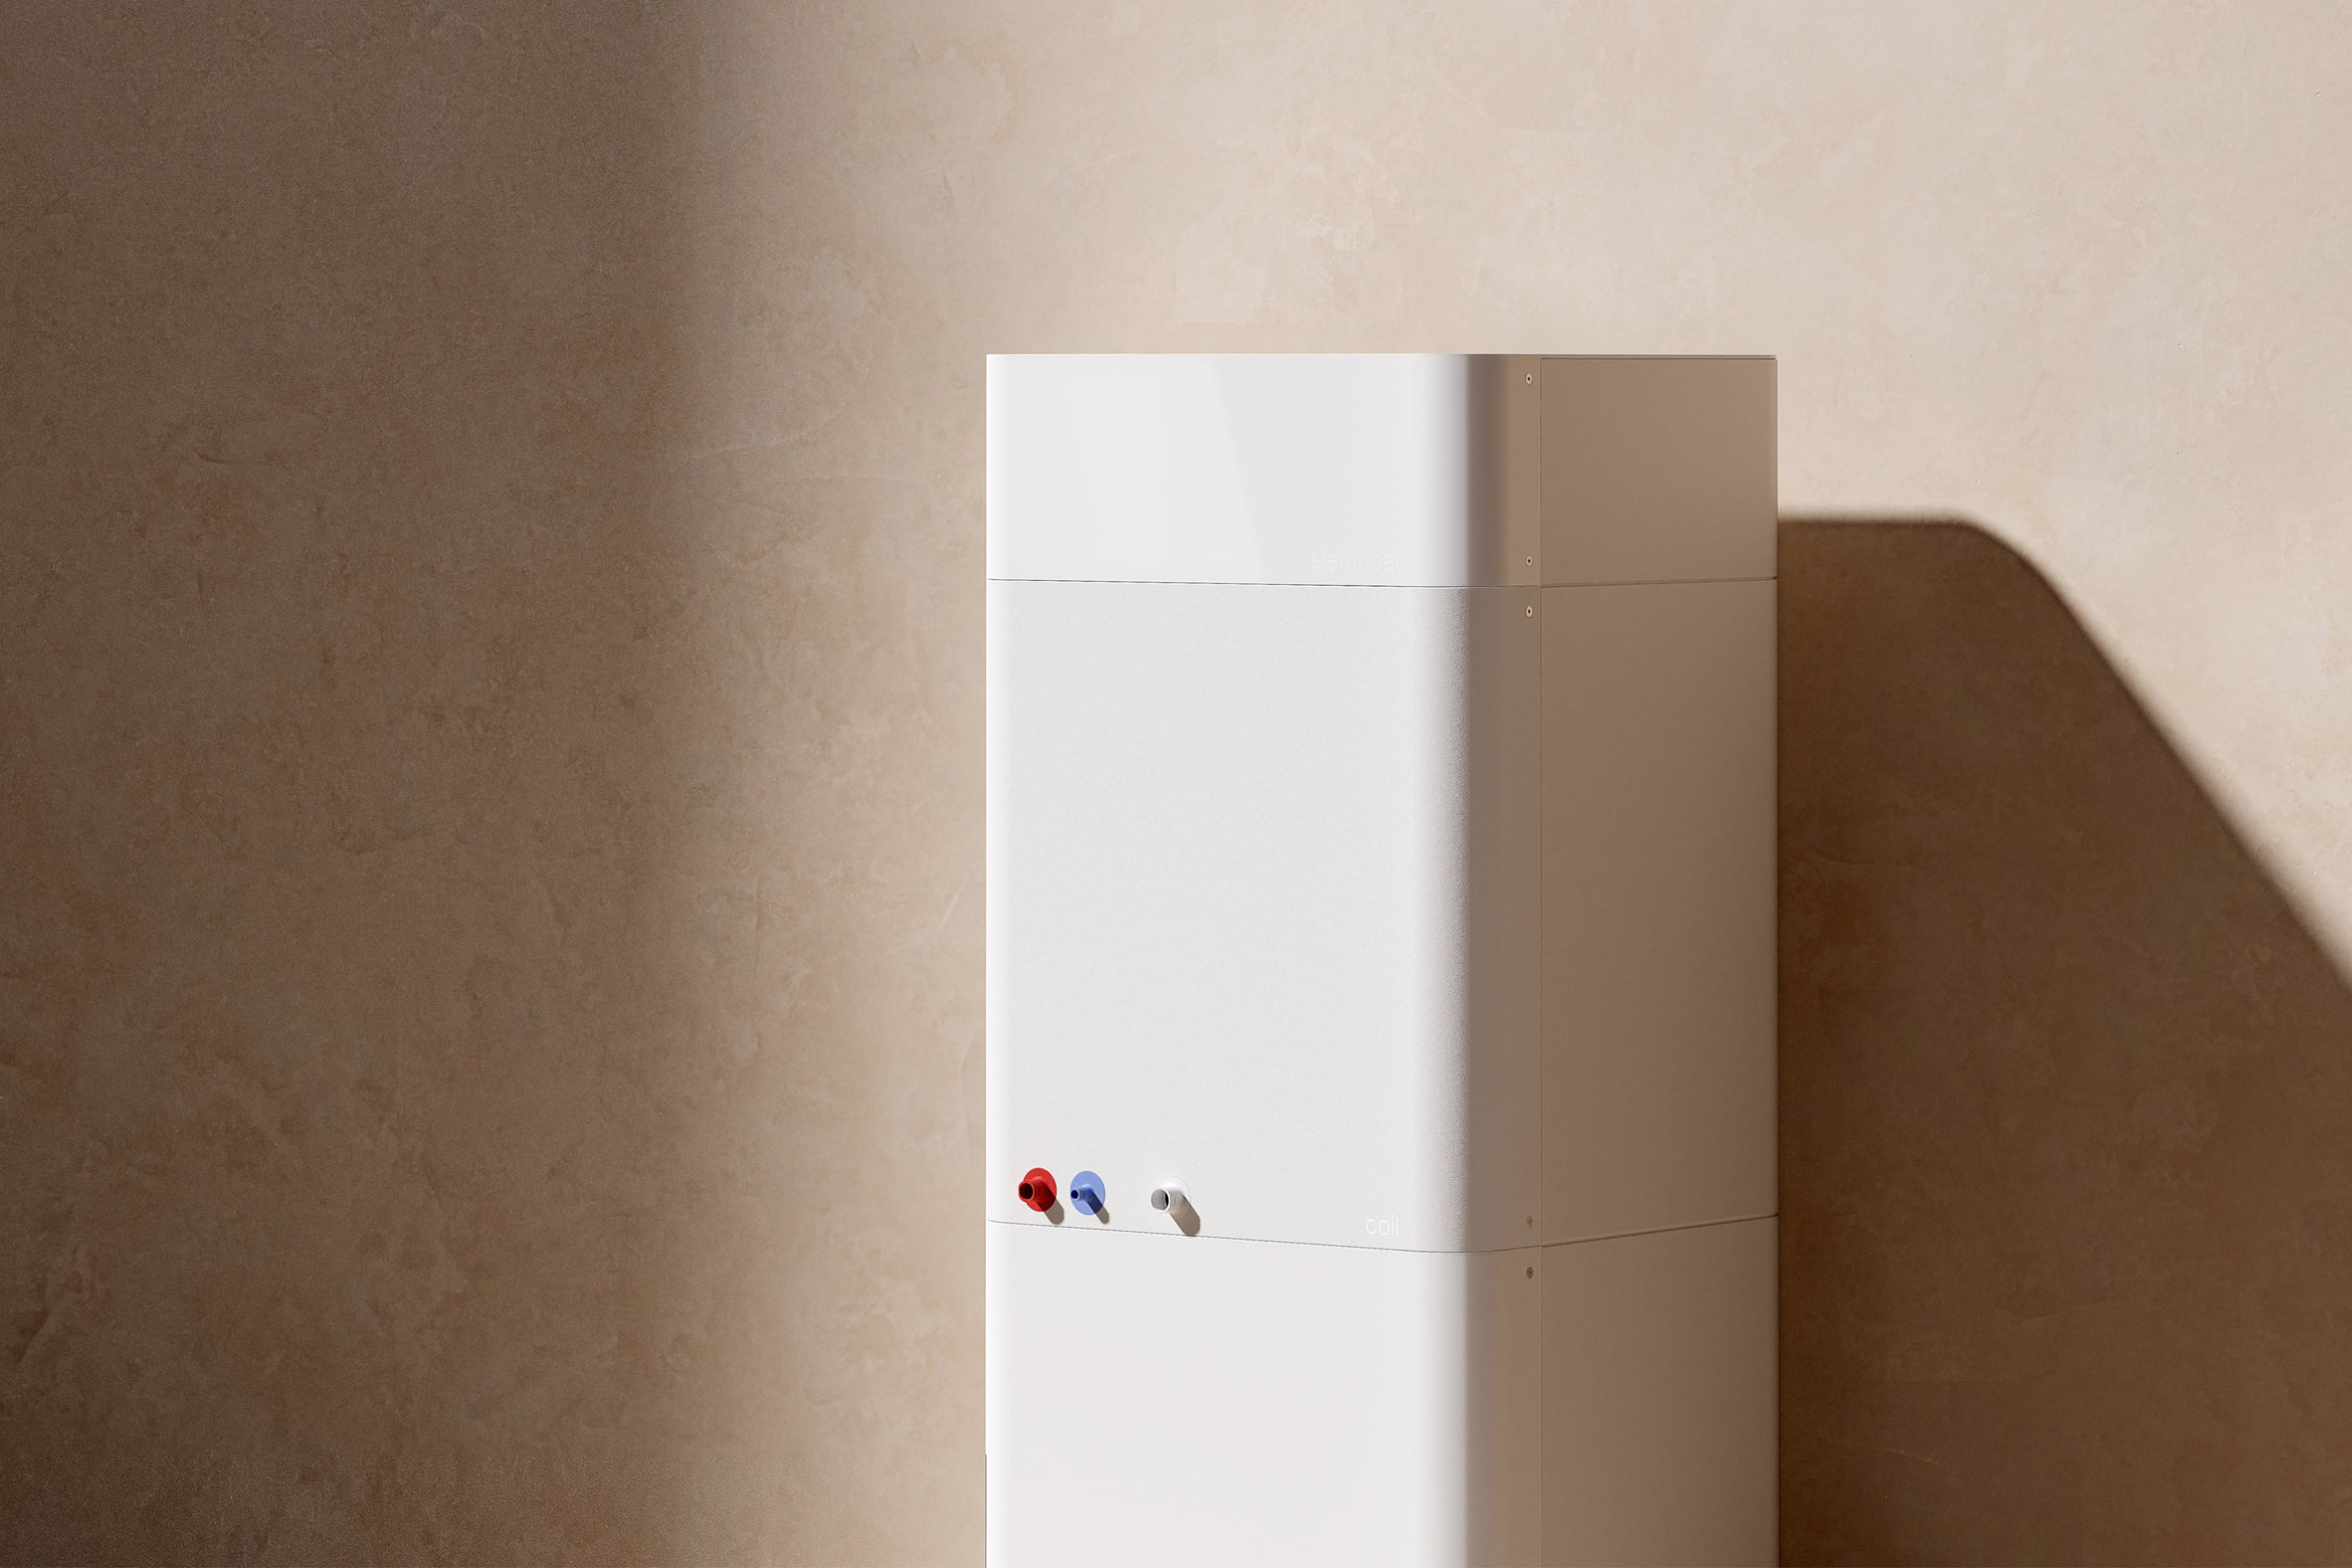 Blond design products for Electric Air's heat pump